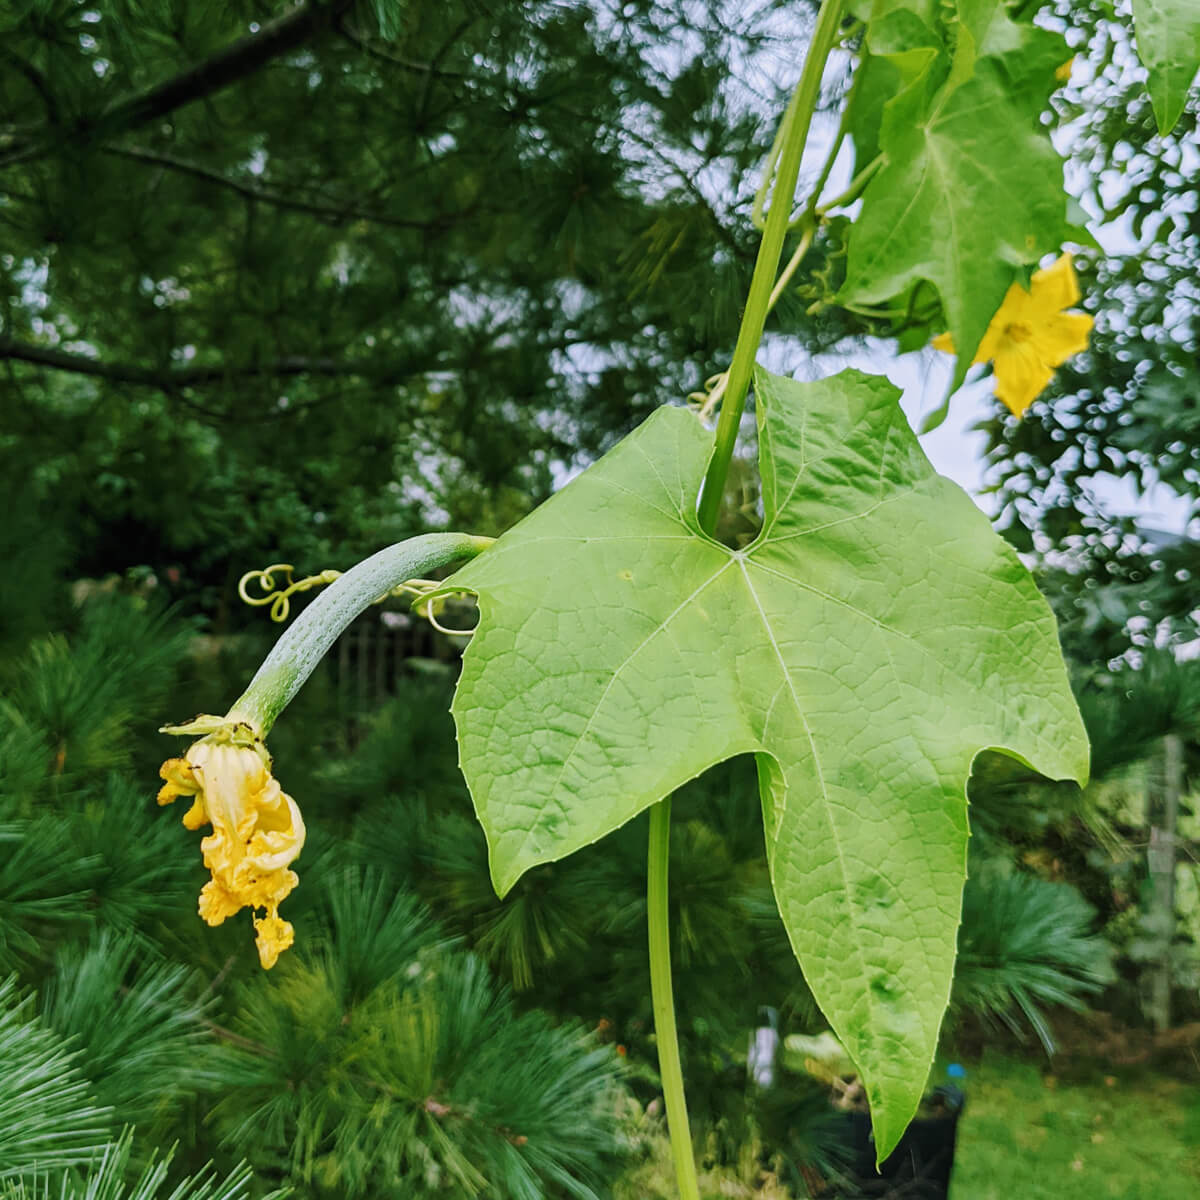 Young Luffa fruit just starting to grow on the luffa plant